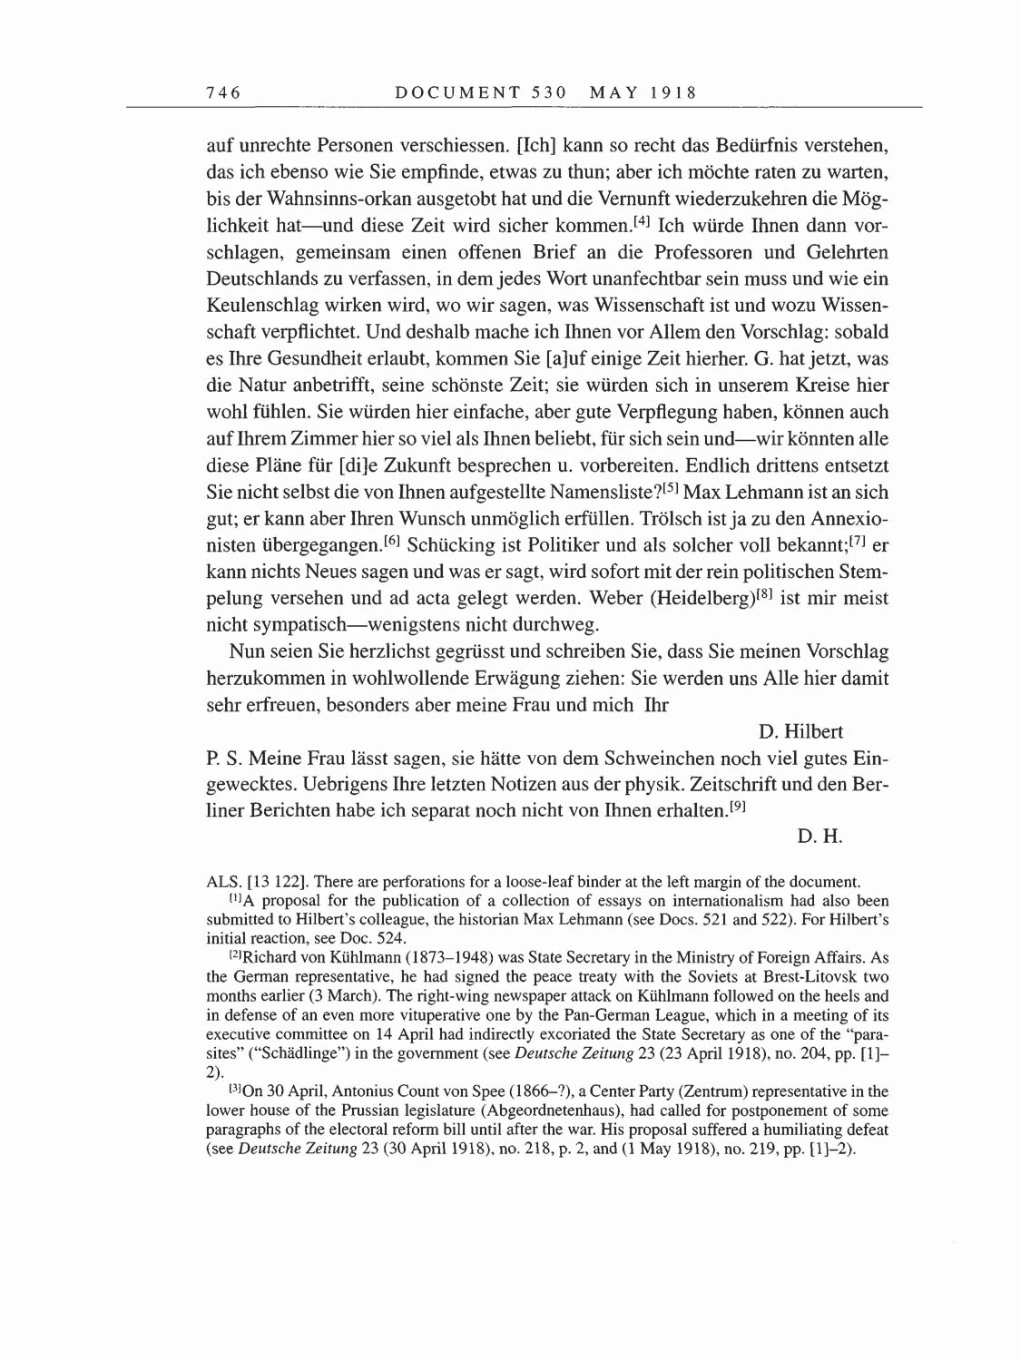 Volume 8, Part B: The Berlin Years: Correspondence 1918 page 746